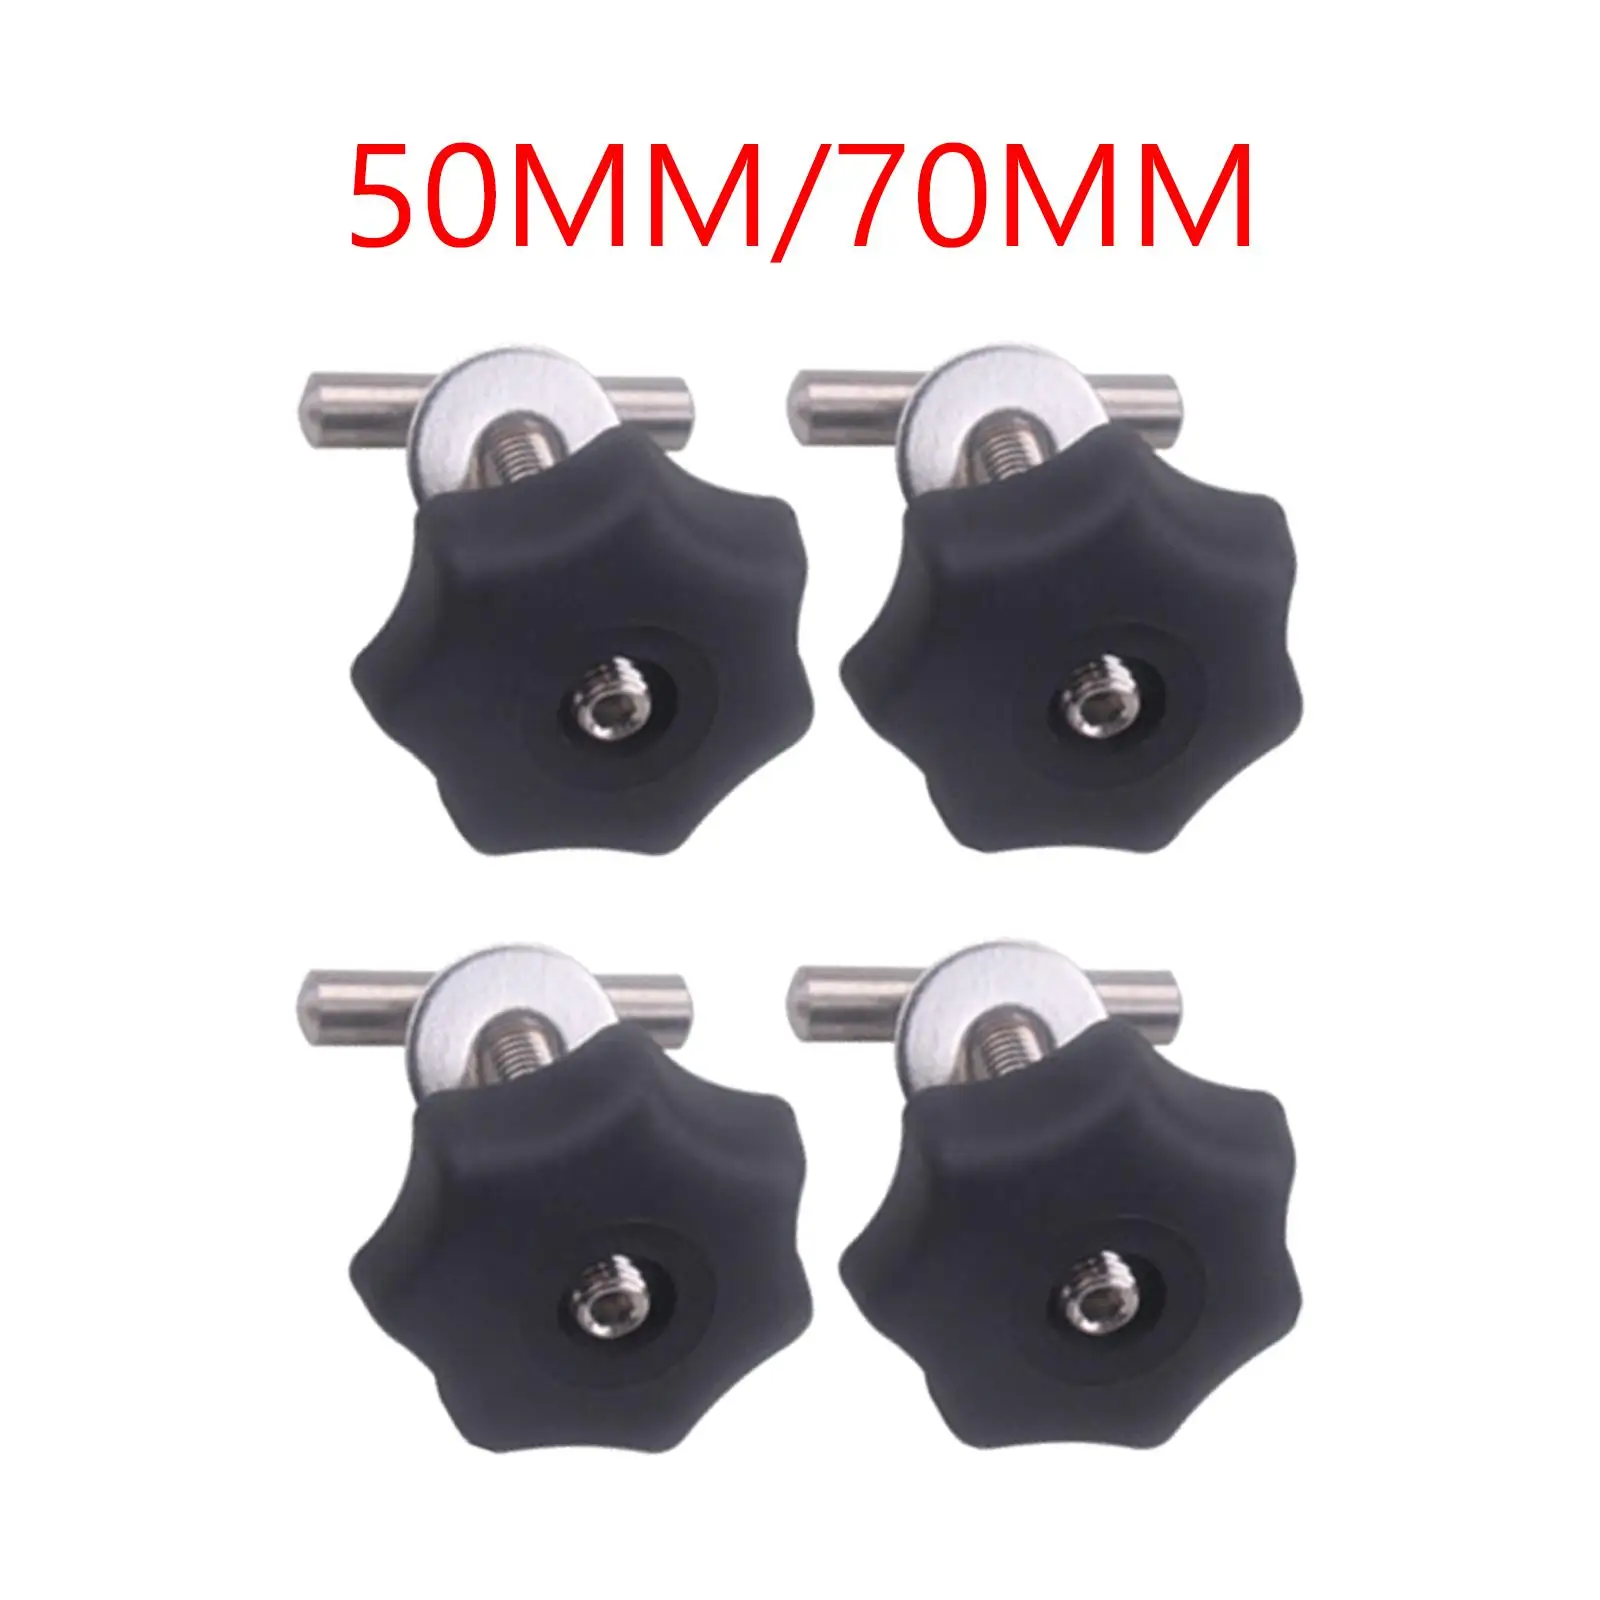 4Pcs Locking Rail Screws Bolt Set Mounting Accessories Stainless Steel Stable Fixing Screws set for VW T5 T6 Multiflexboard